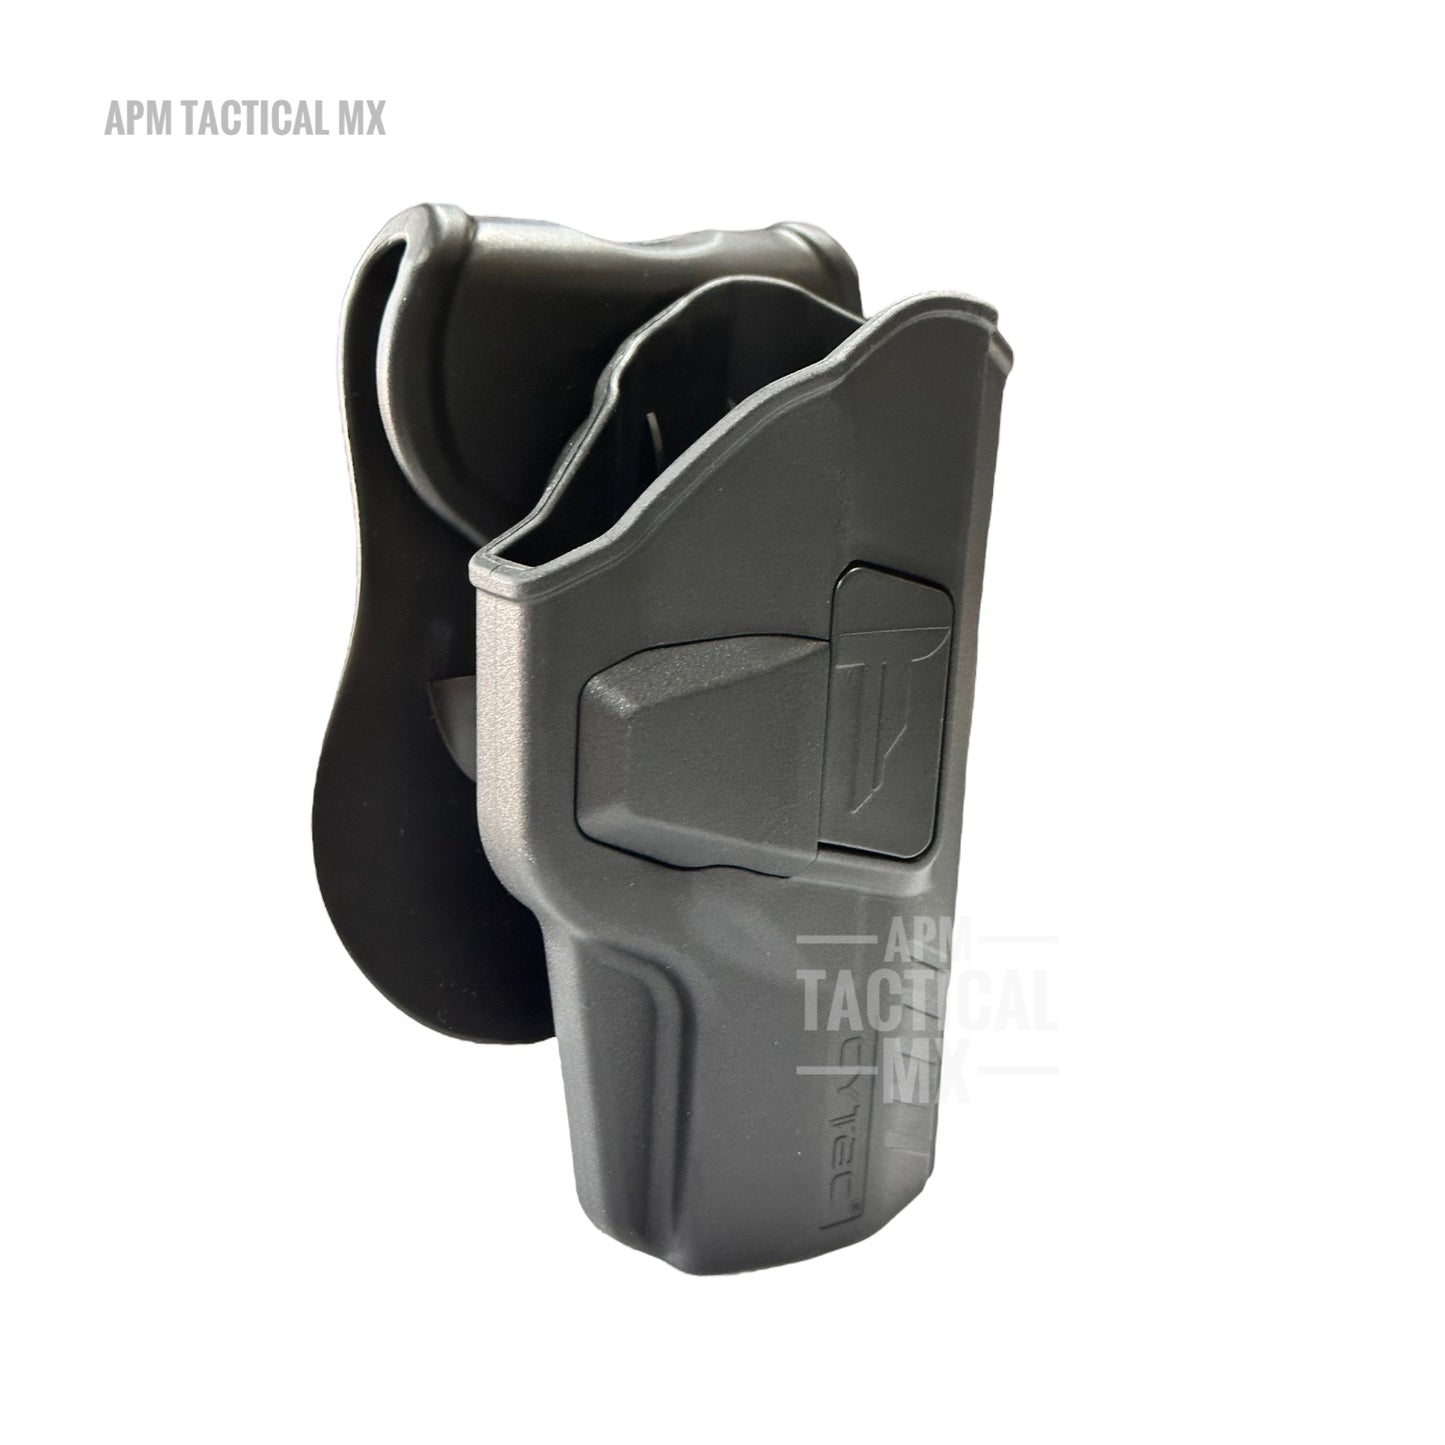 Holster Cytac Px4 Storm